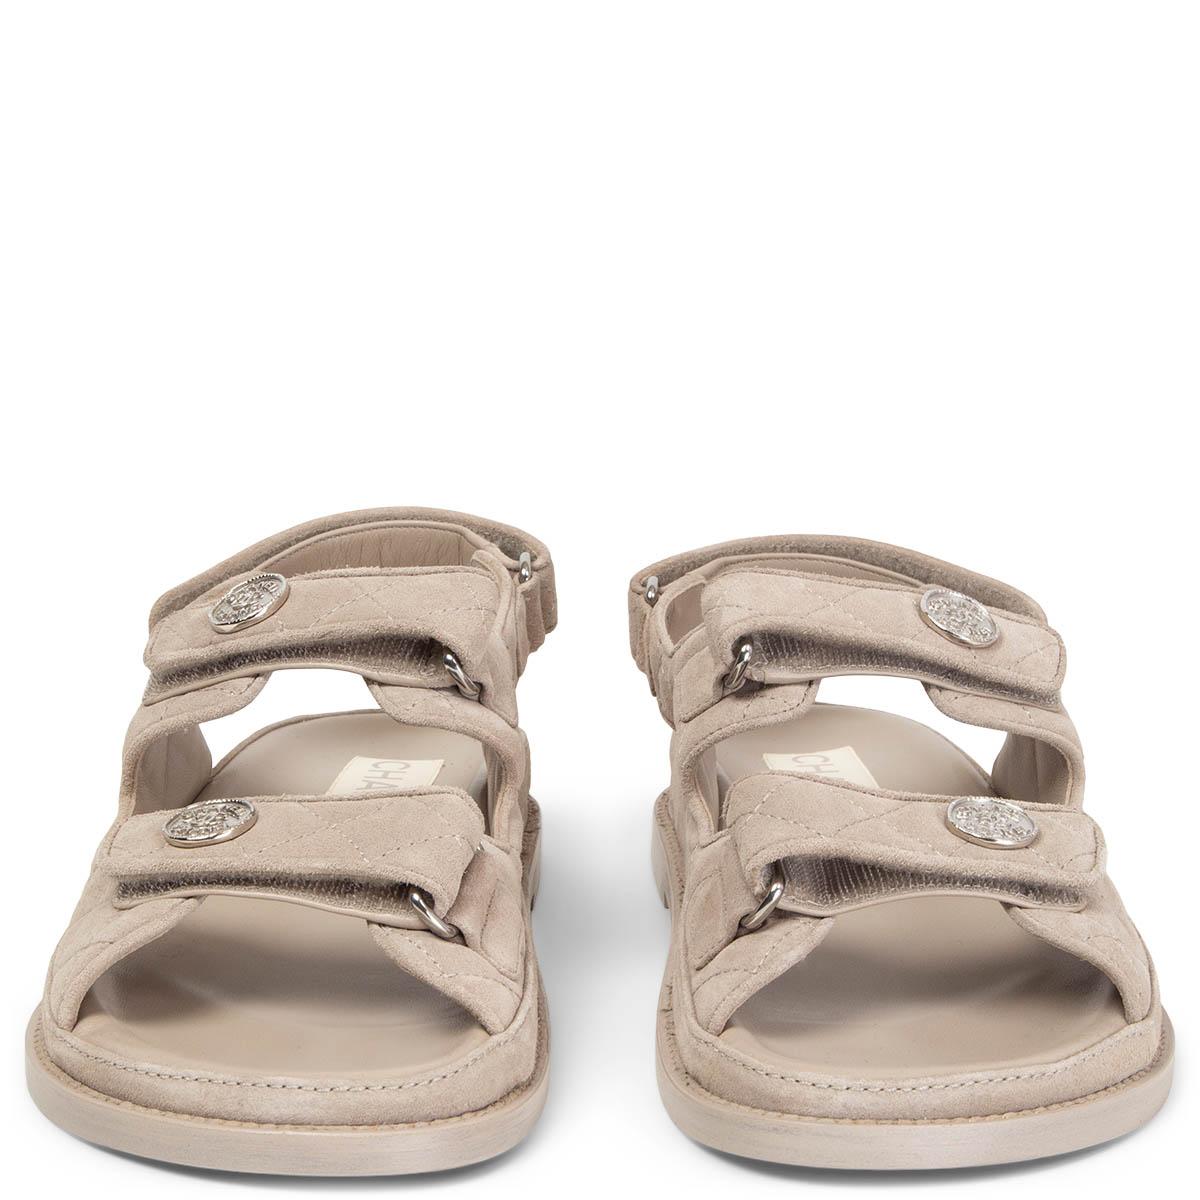 100% authentic Chanel Dad Sandals in light grey quilted suede featuring velcro closure and silver-tone CC logo buttons. Brand new. Come with dust bag and box. 

Measurements
Model	Chanel22P
Imprinted Size	39C
Shoe Size	39
Inside Sole	25.5cm